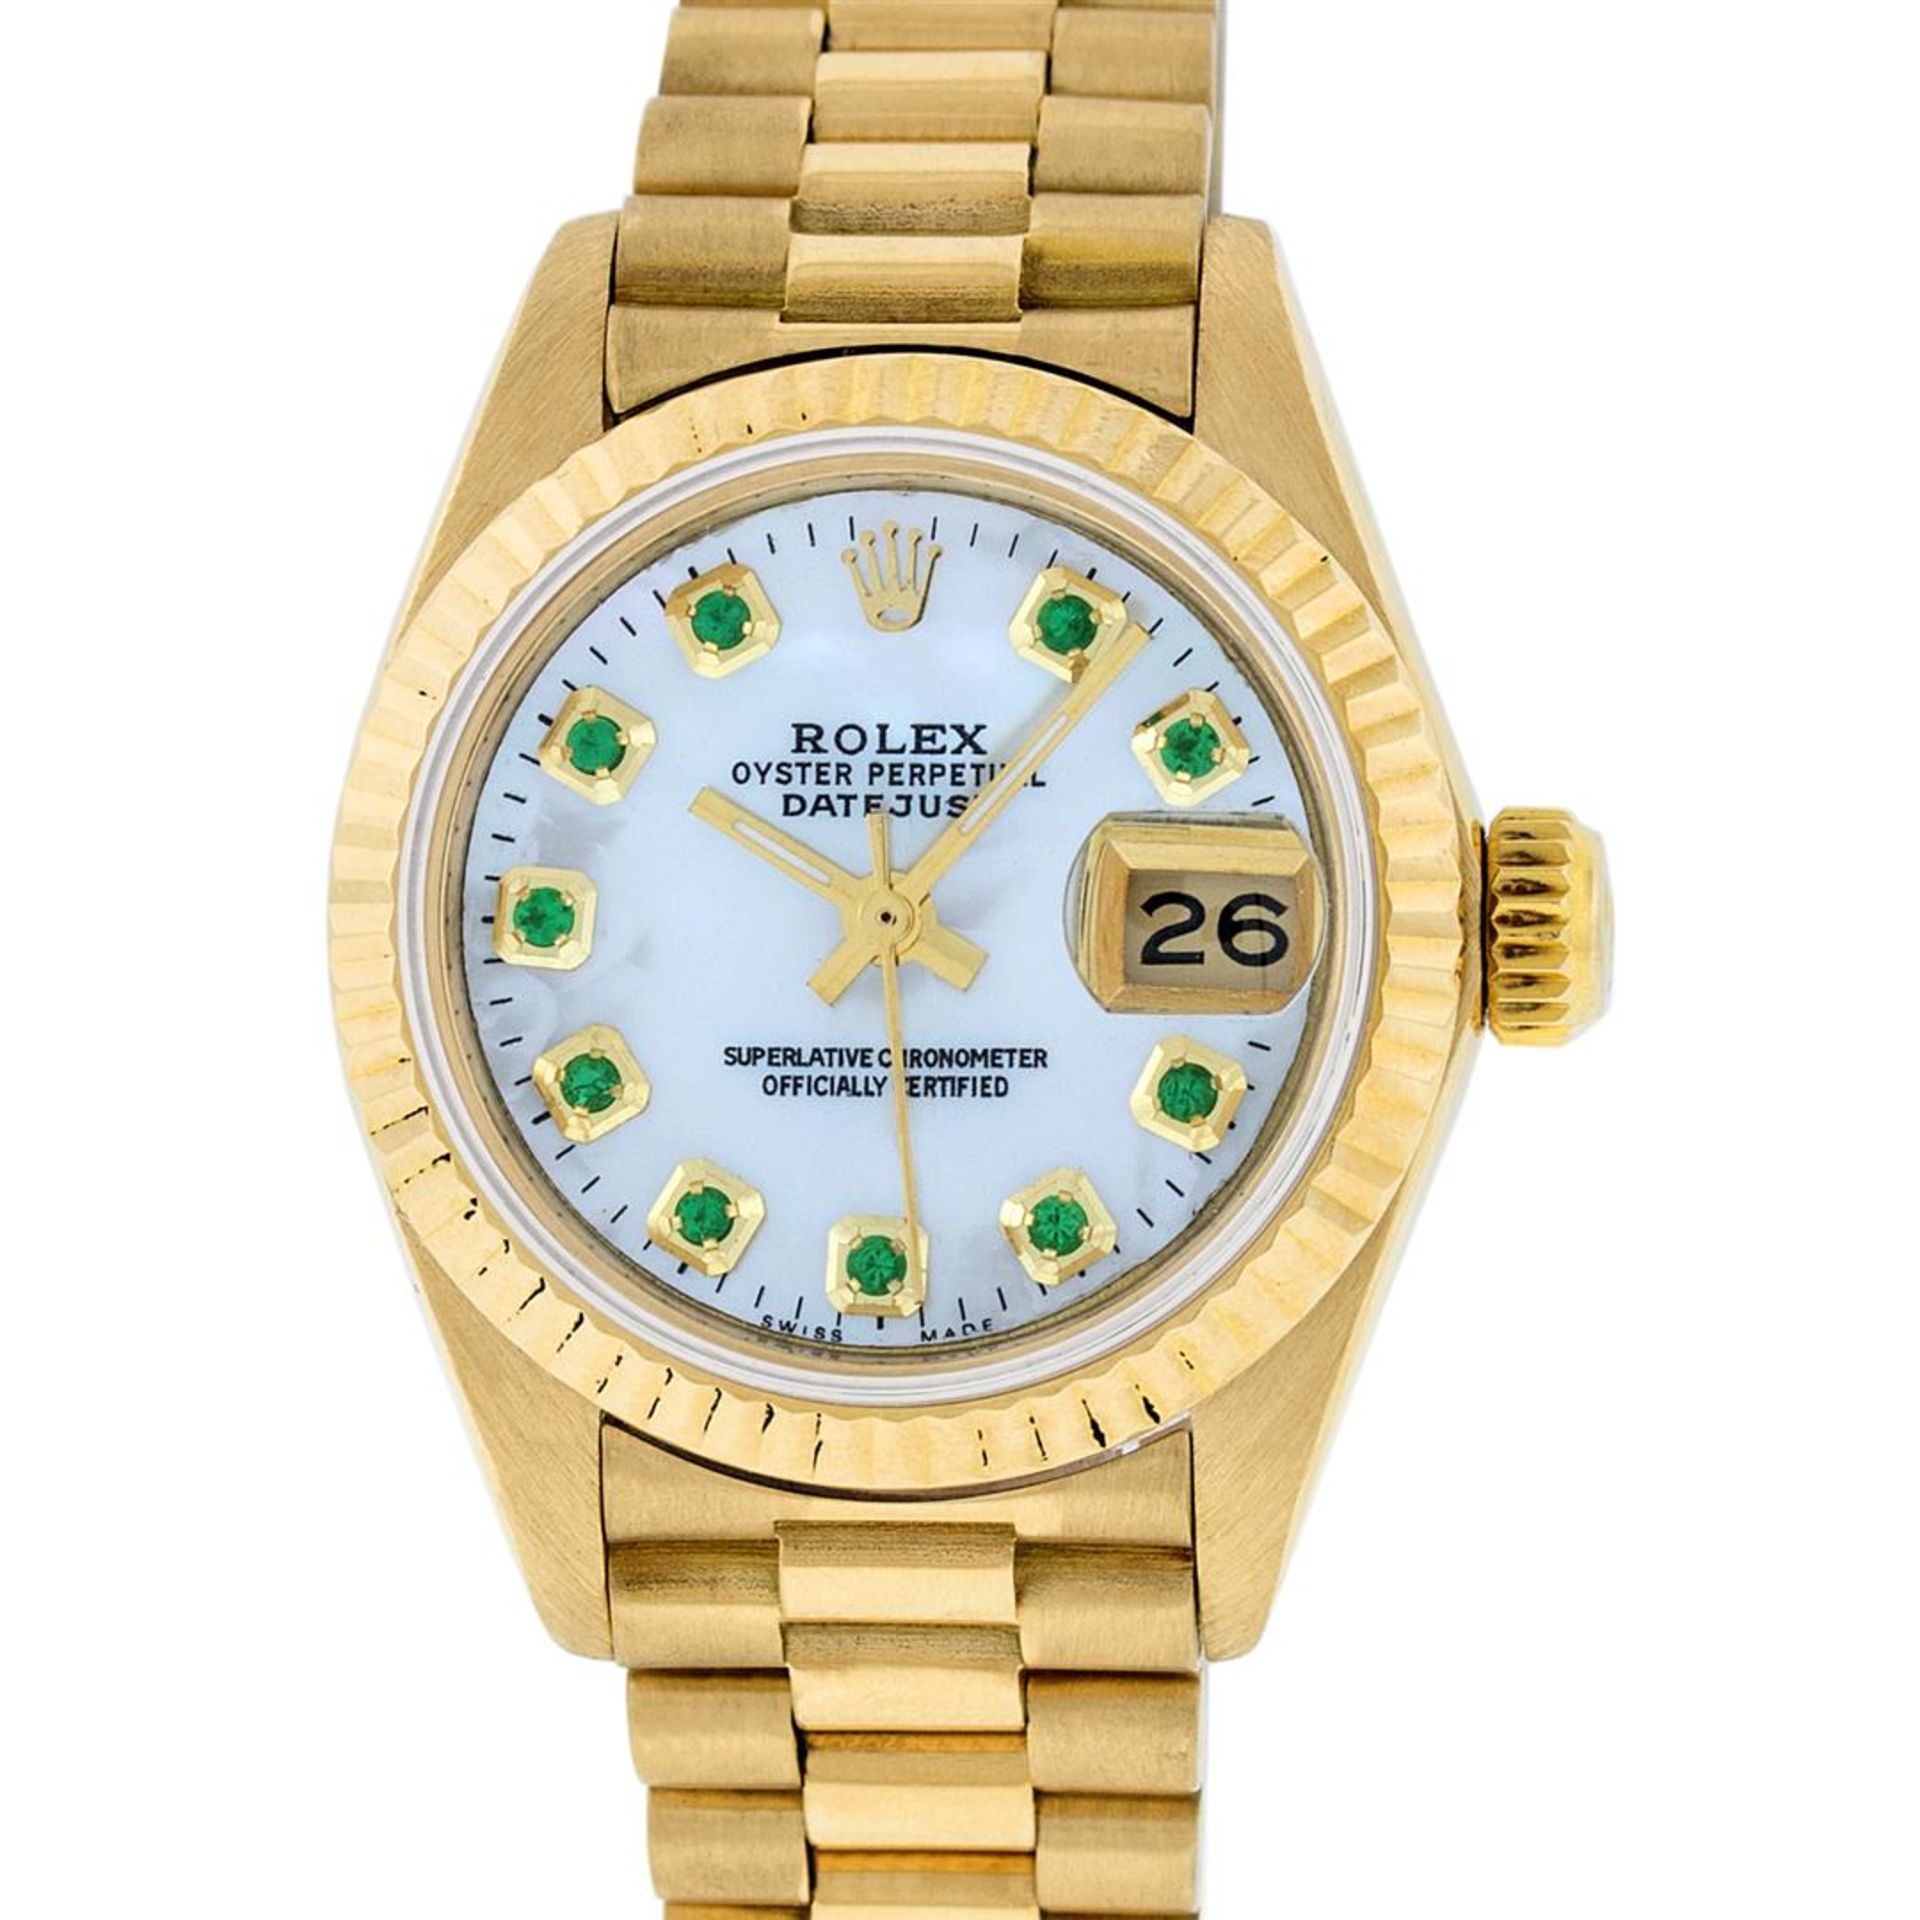 Rolex Ladies 18K Yellow Gold Mother Of Pearl Emerald Datejust President Wristwat - Image 6 of 9